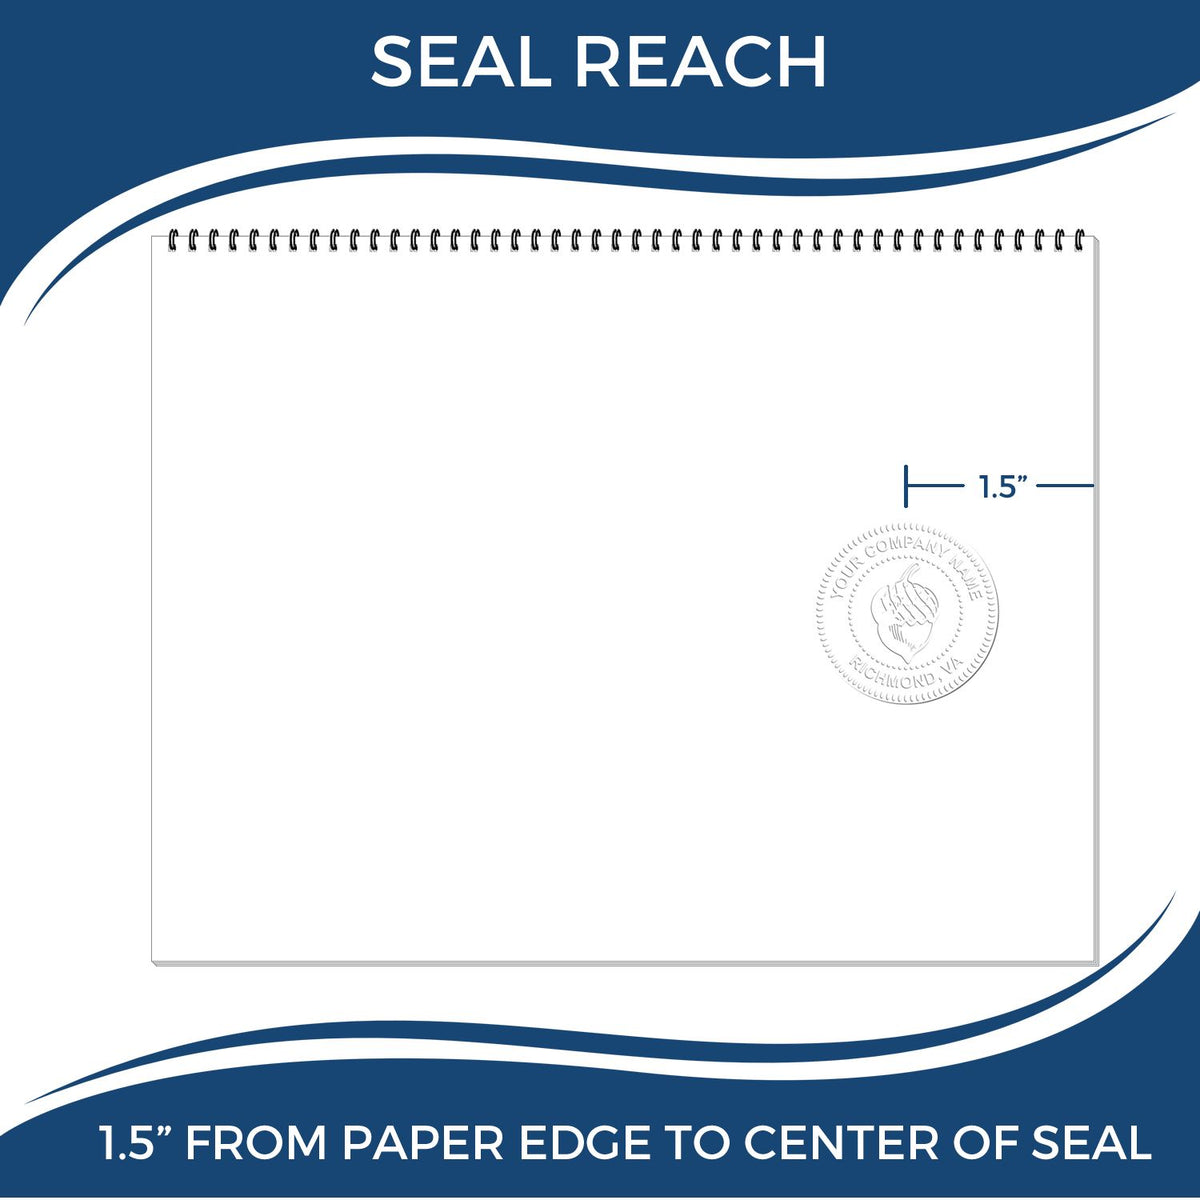 An infographic showing the seal reach which is represented by a ruler and a miniature seal image of the Gift North Dakota Landscape Architect Seal